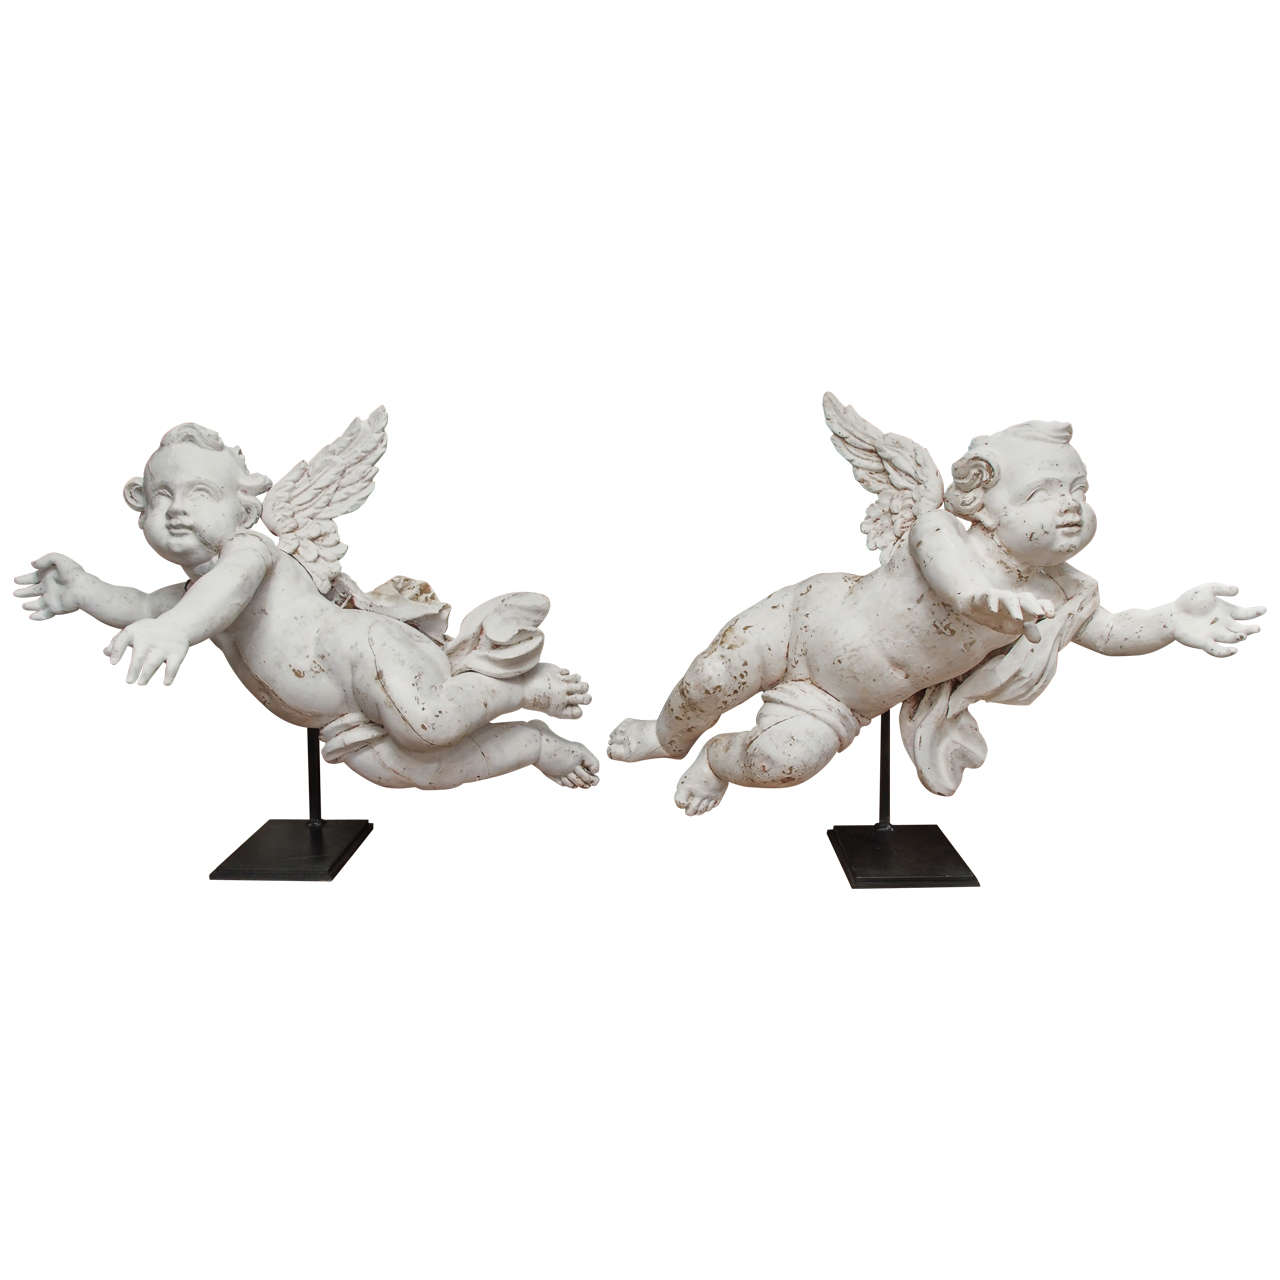 Beautifully Wood-Carved 19th Century Pair of Putti For Sale